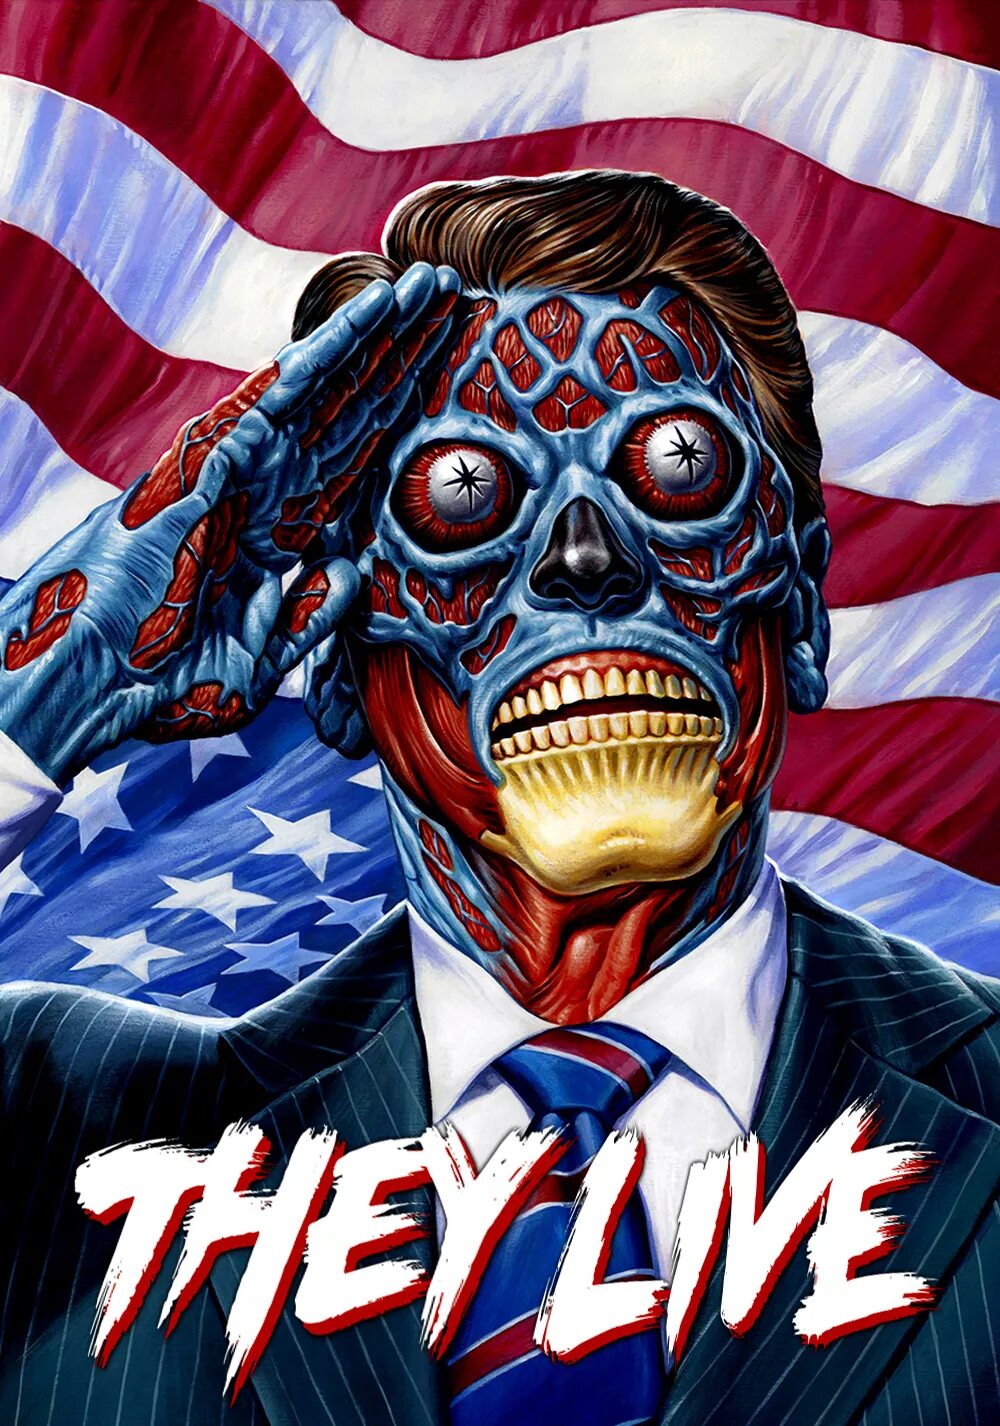 They lives или they live. Чужие среди нас 1988. Джон Карпентер чужие среди нас. Родди Пайпер чужие среди нас.